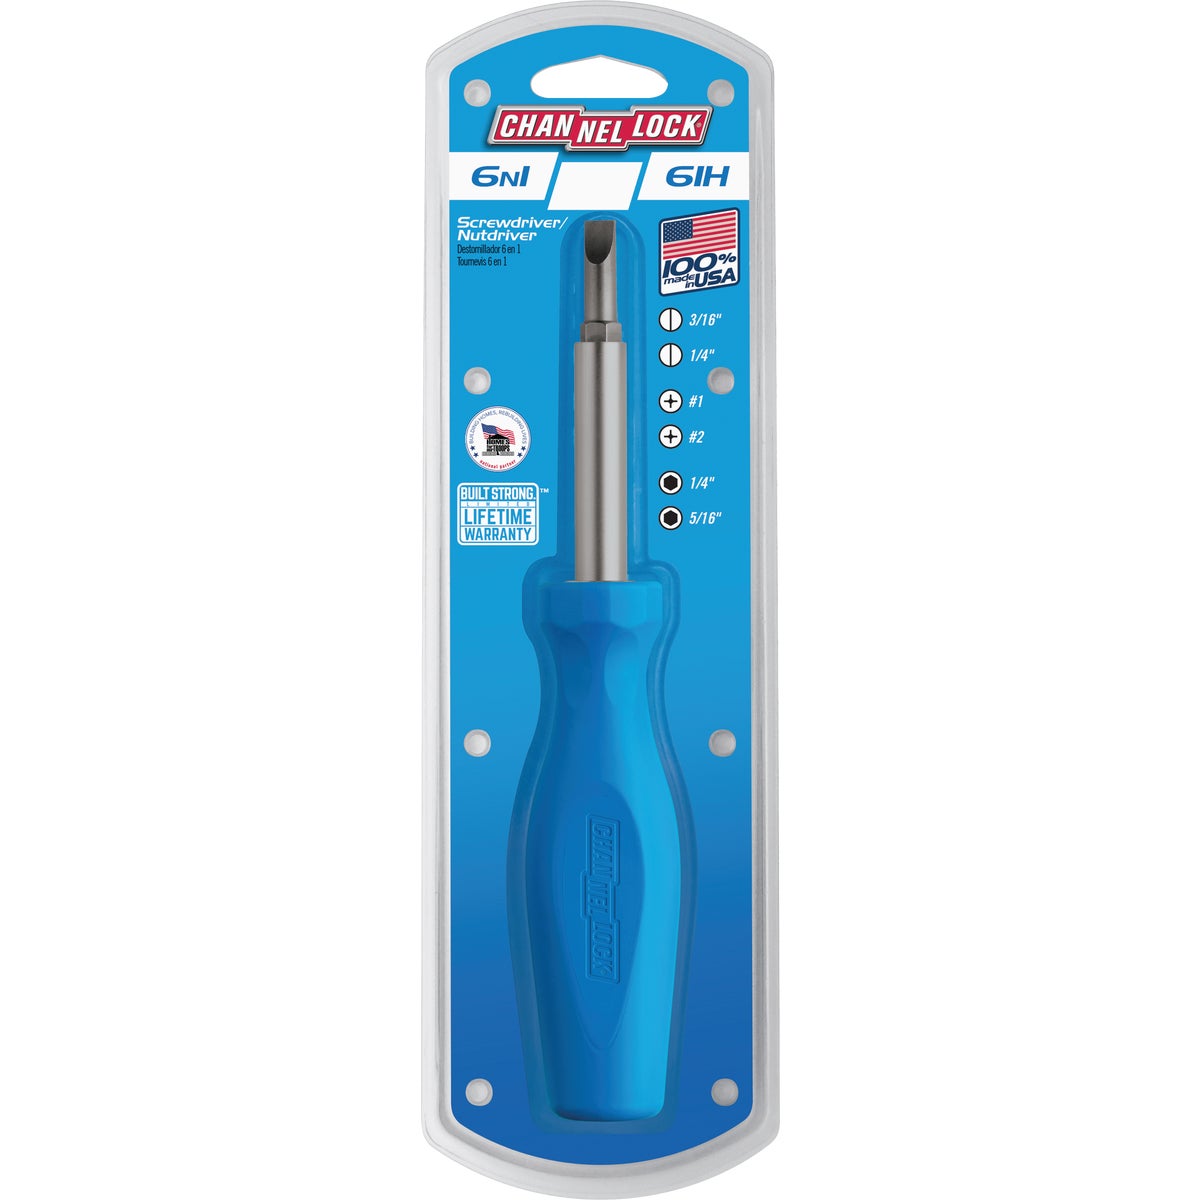 Item 302614, The CHANNELLOCK 61H 6-in-1 Multi-bit Screwdriver means business with two 